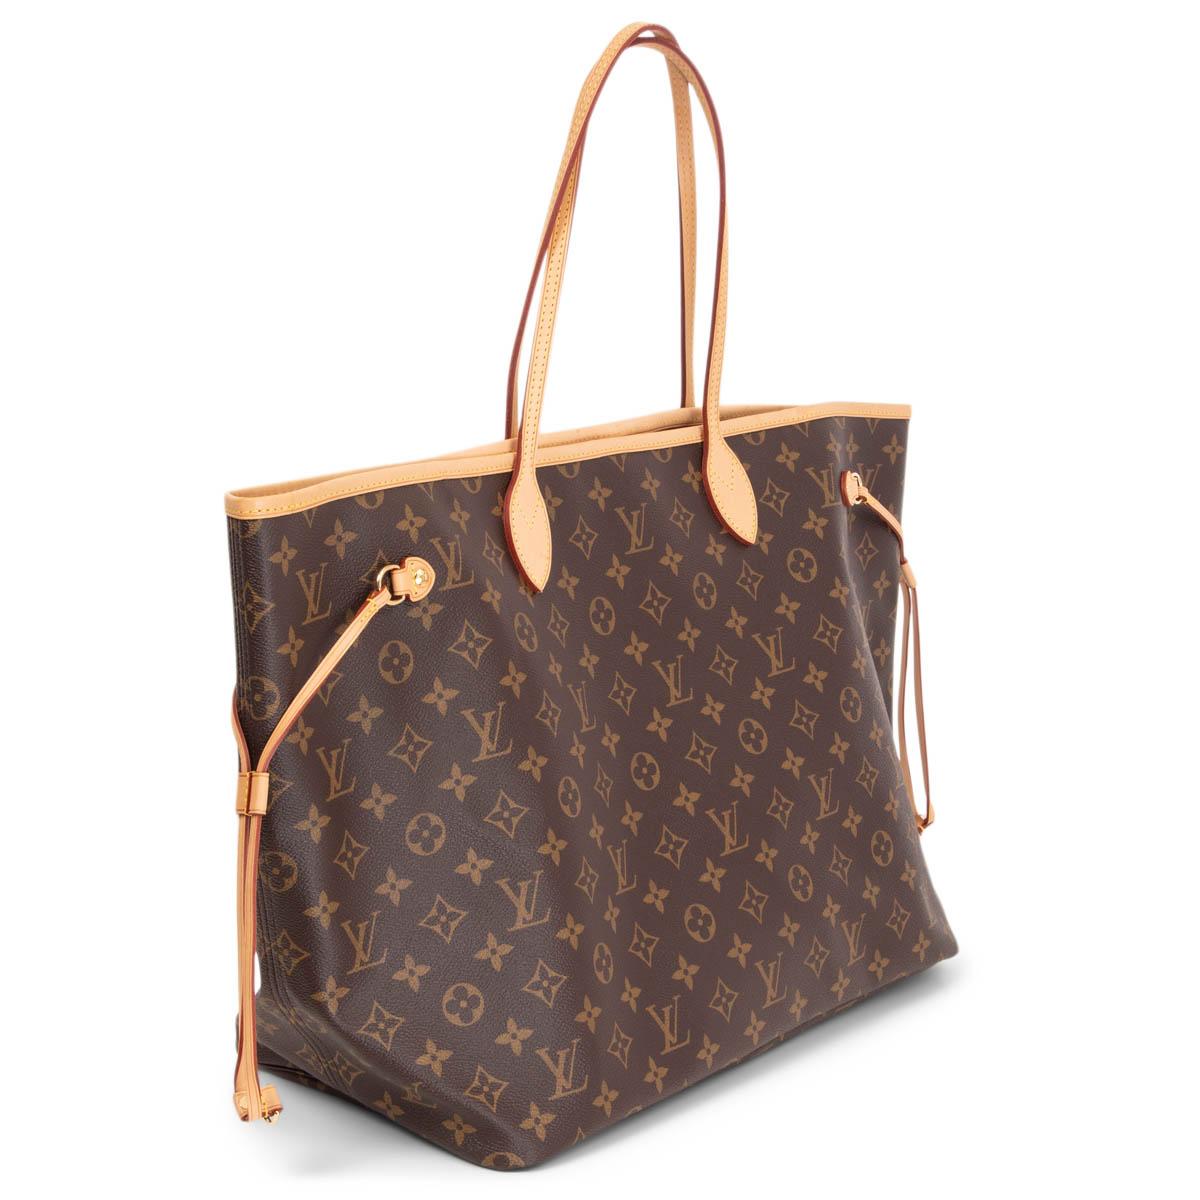 100% authentic Louis Vuitton Neverfull GM tote made from brown and camel supple Monogram canvas with natural cowhide trim. Side laces that cinch, slim and comfortable handles. Closes with a hook closure and is lined in beige striped canvas with one